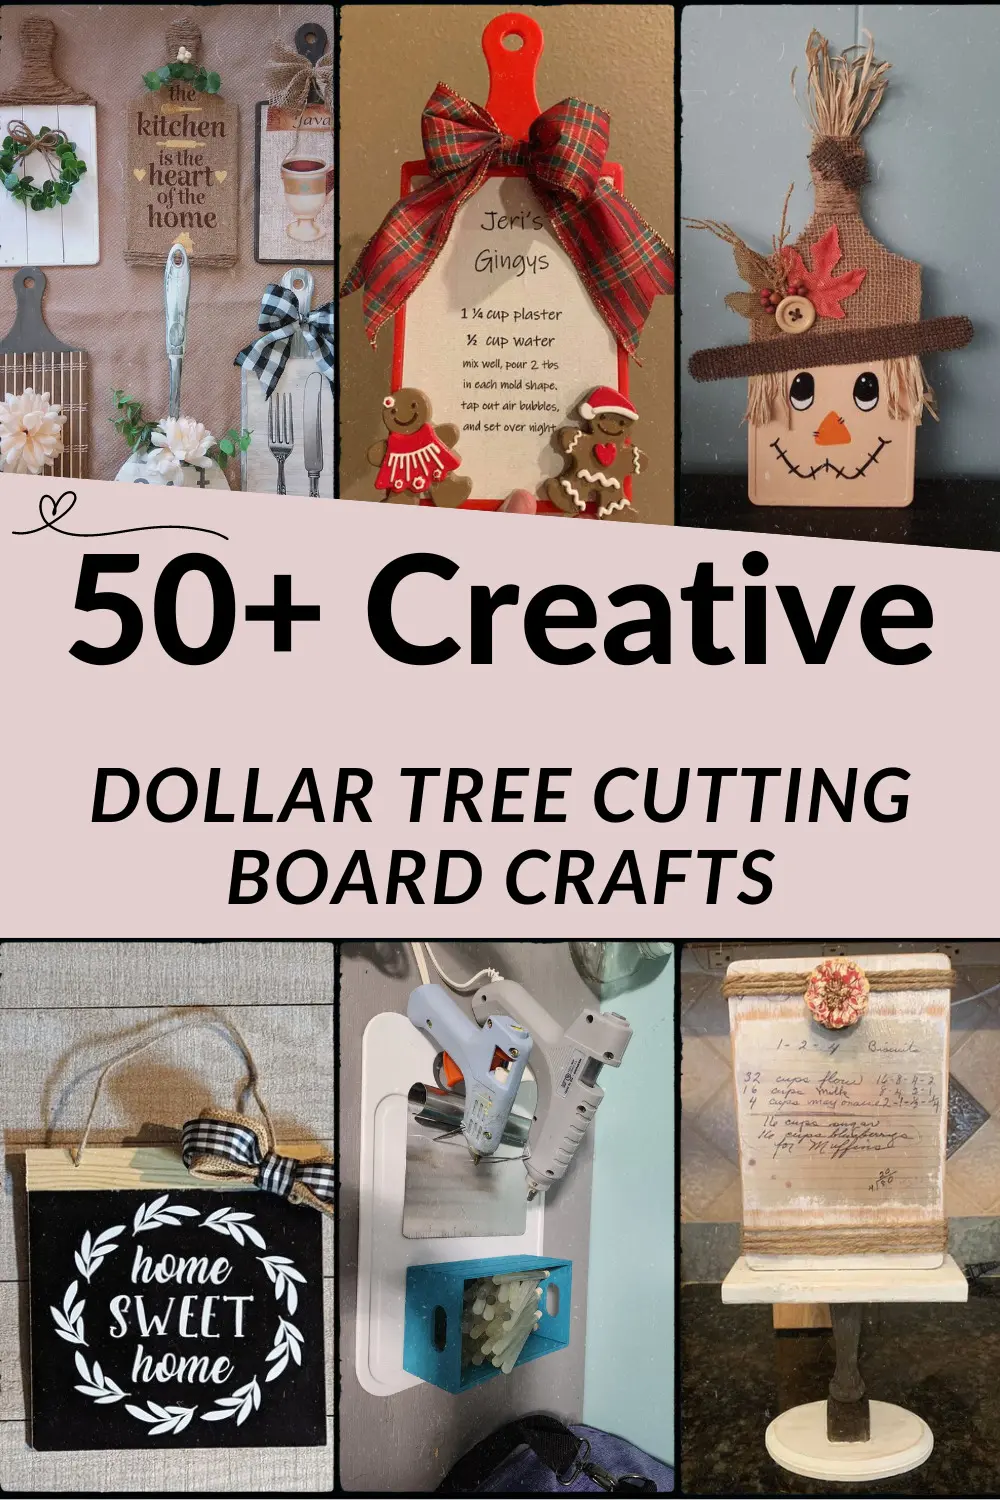 DOLLAR TREE CRAFT - Decorate with Tip and More